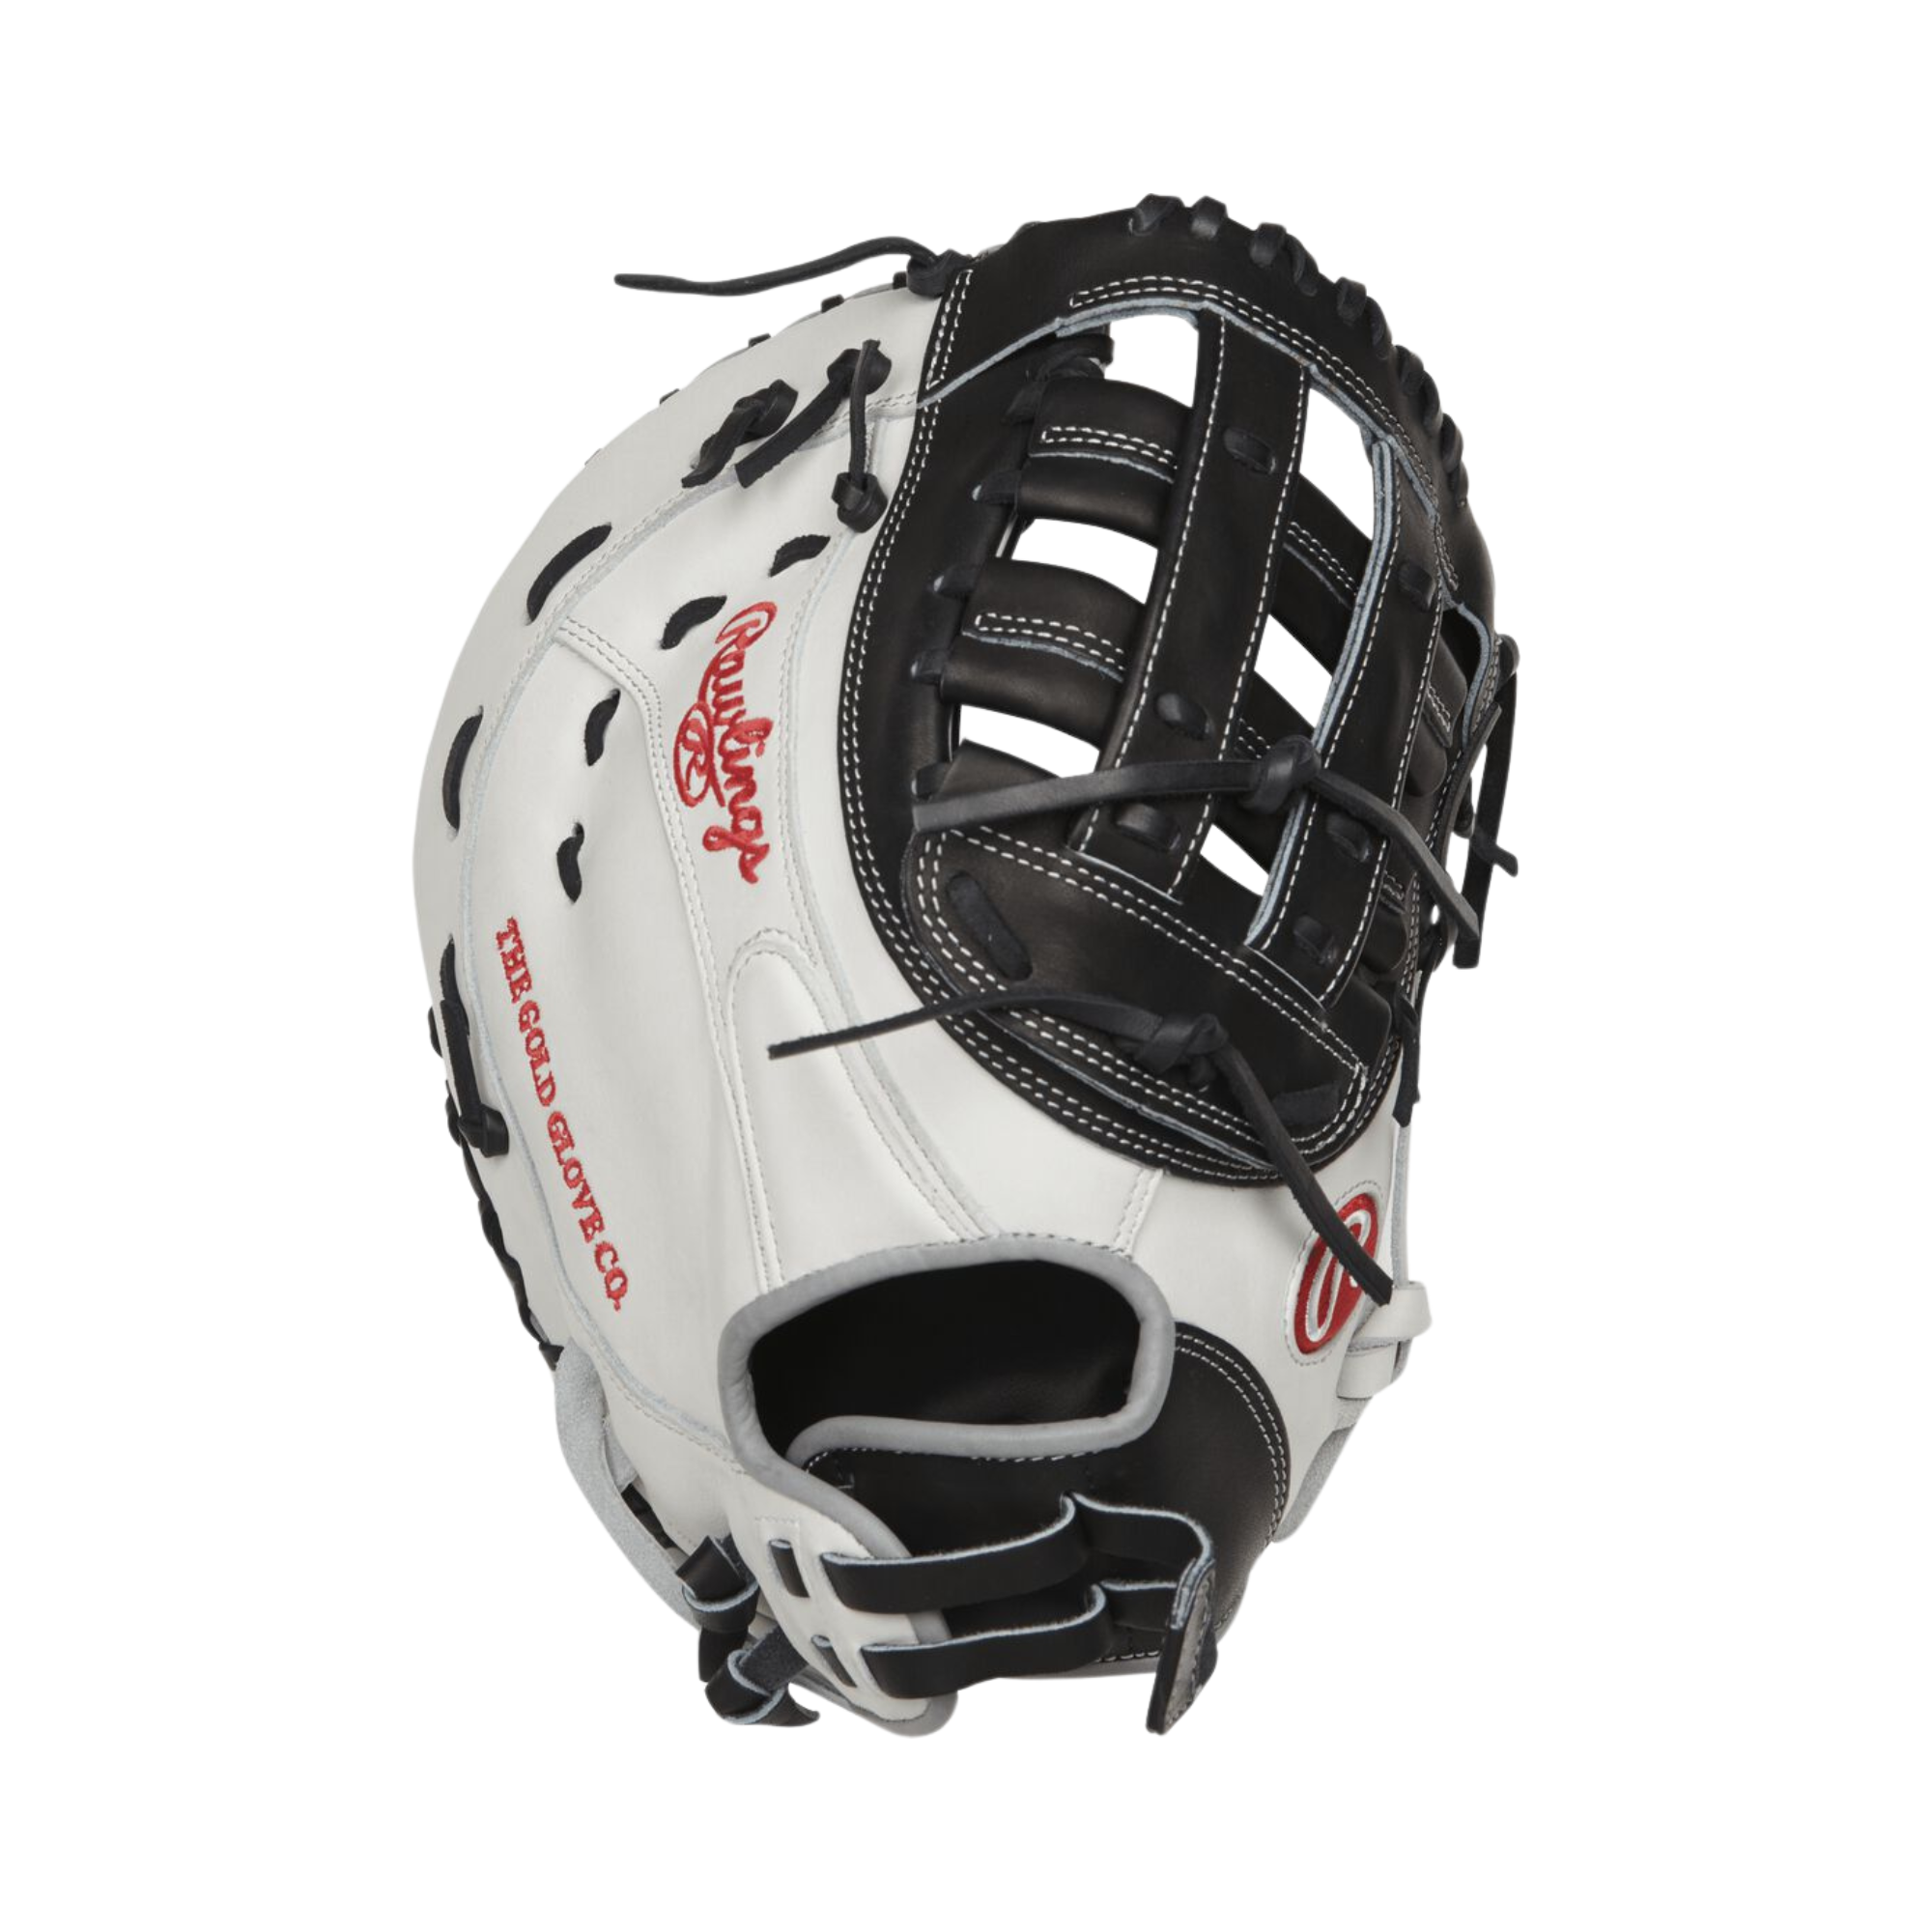 Rawlings Heart of the Hide 13-Inch Softball First base Glove